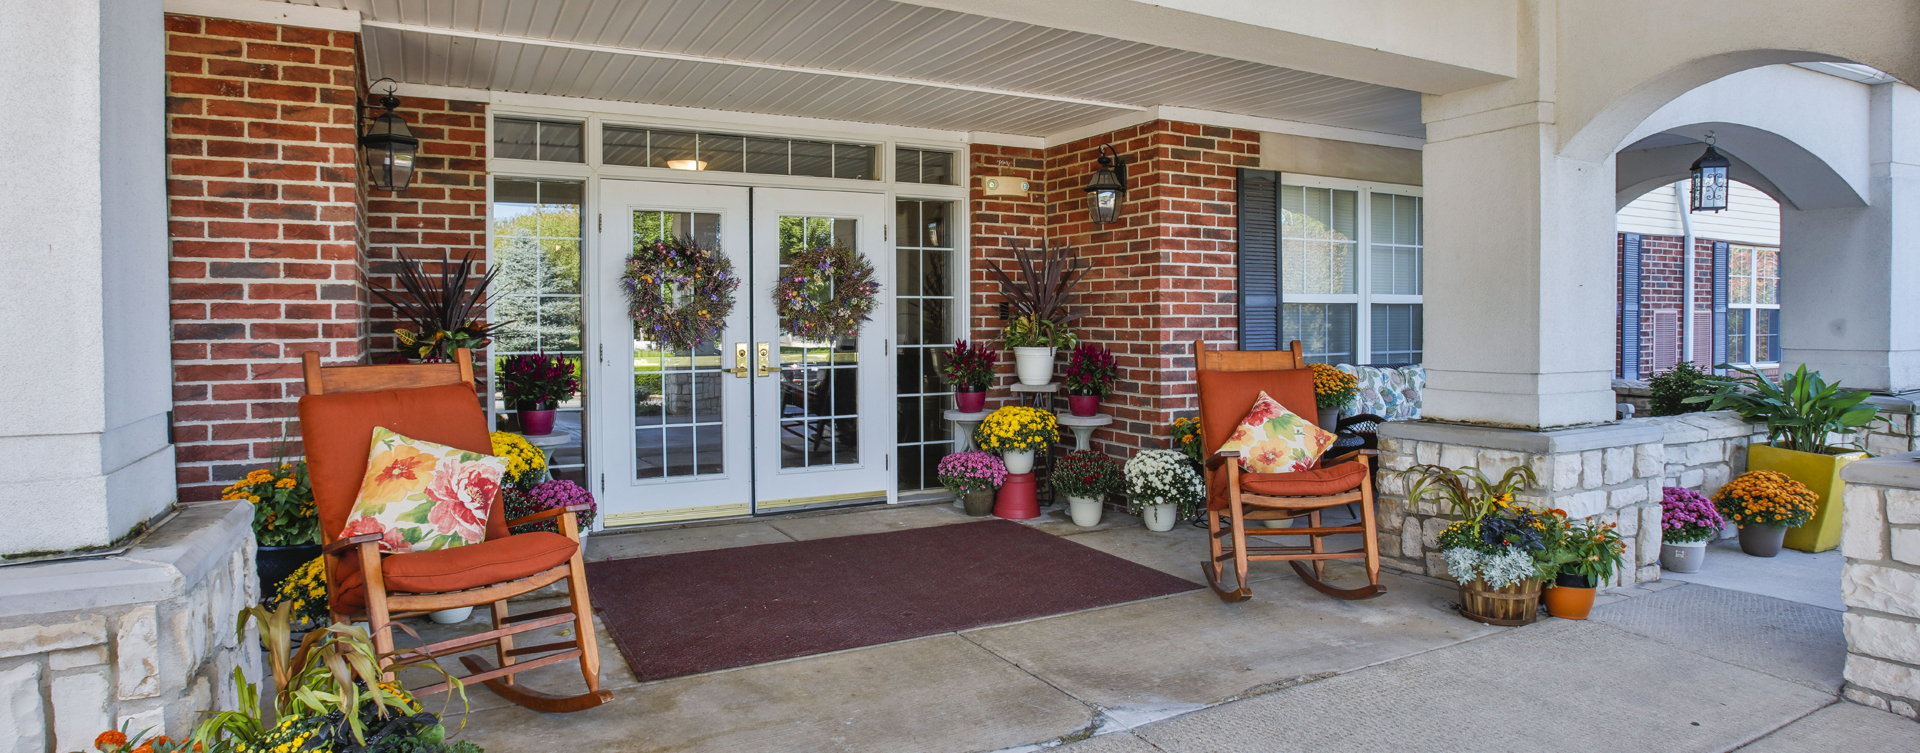 Enjoy conversations with friends on the porch at Bickford of Peoria